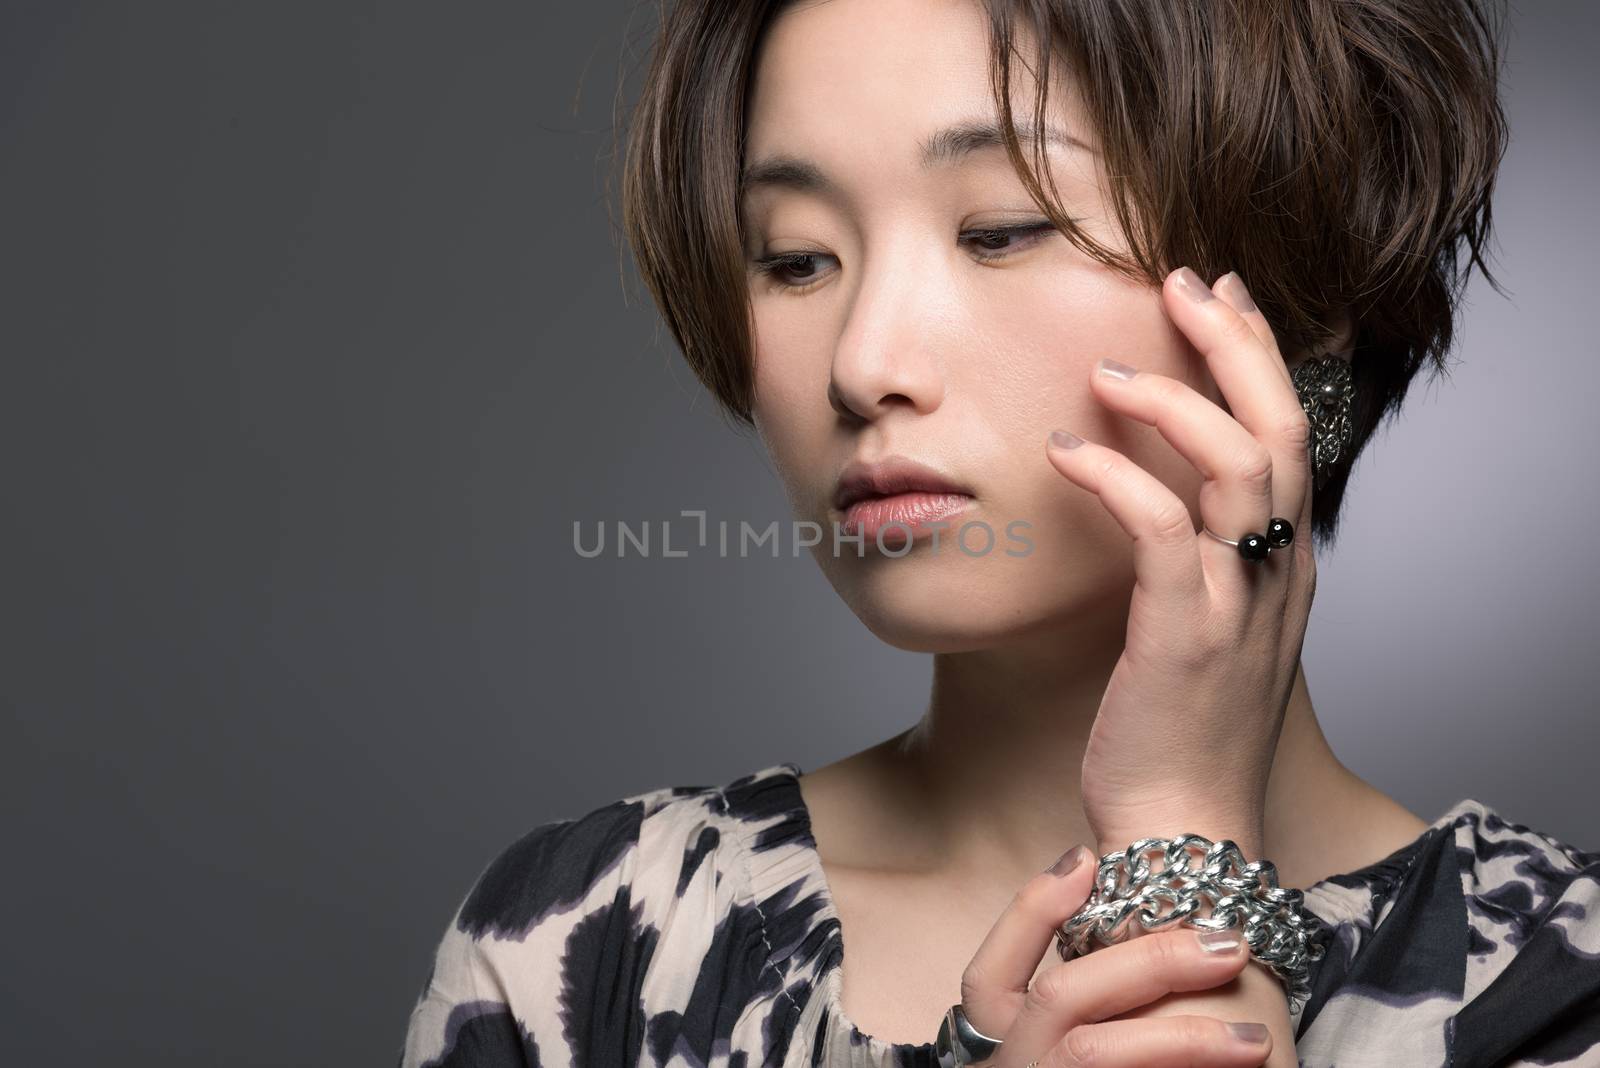 A portrait of a young, beautiful and very fashionable Japanese woman posed gently on a dark background.